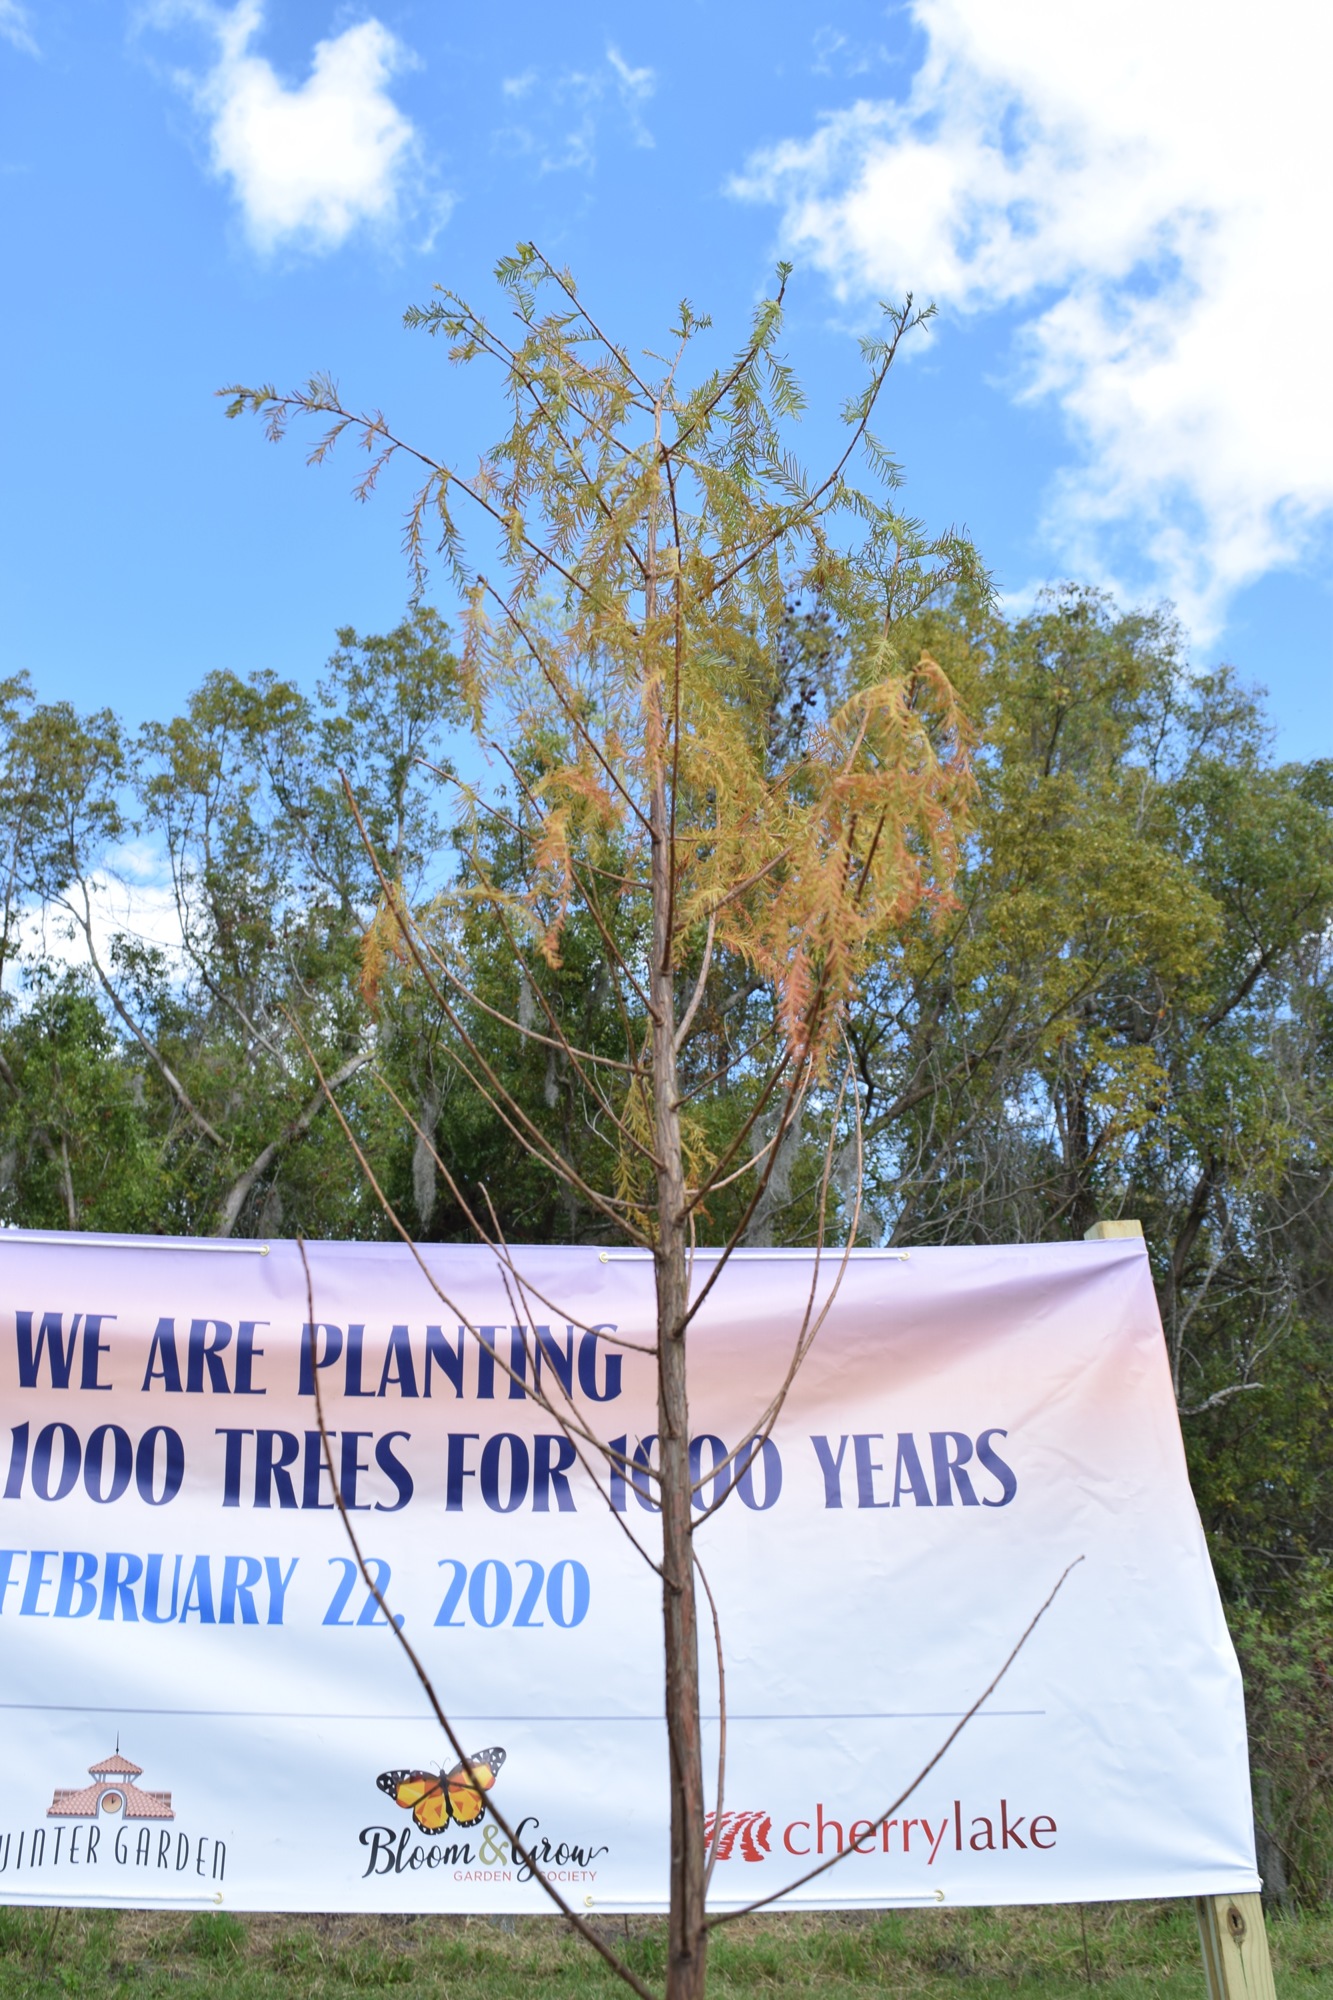 The 1,000th bald cypress tree will grow from just a few feet tall to more than 100 feet tall over time.